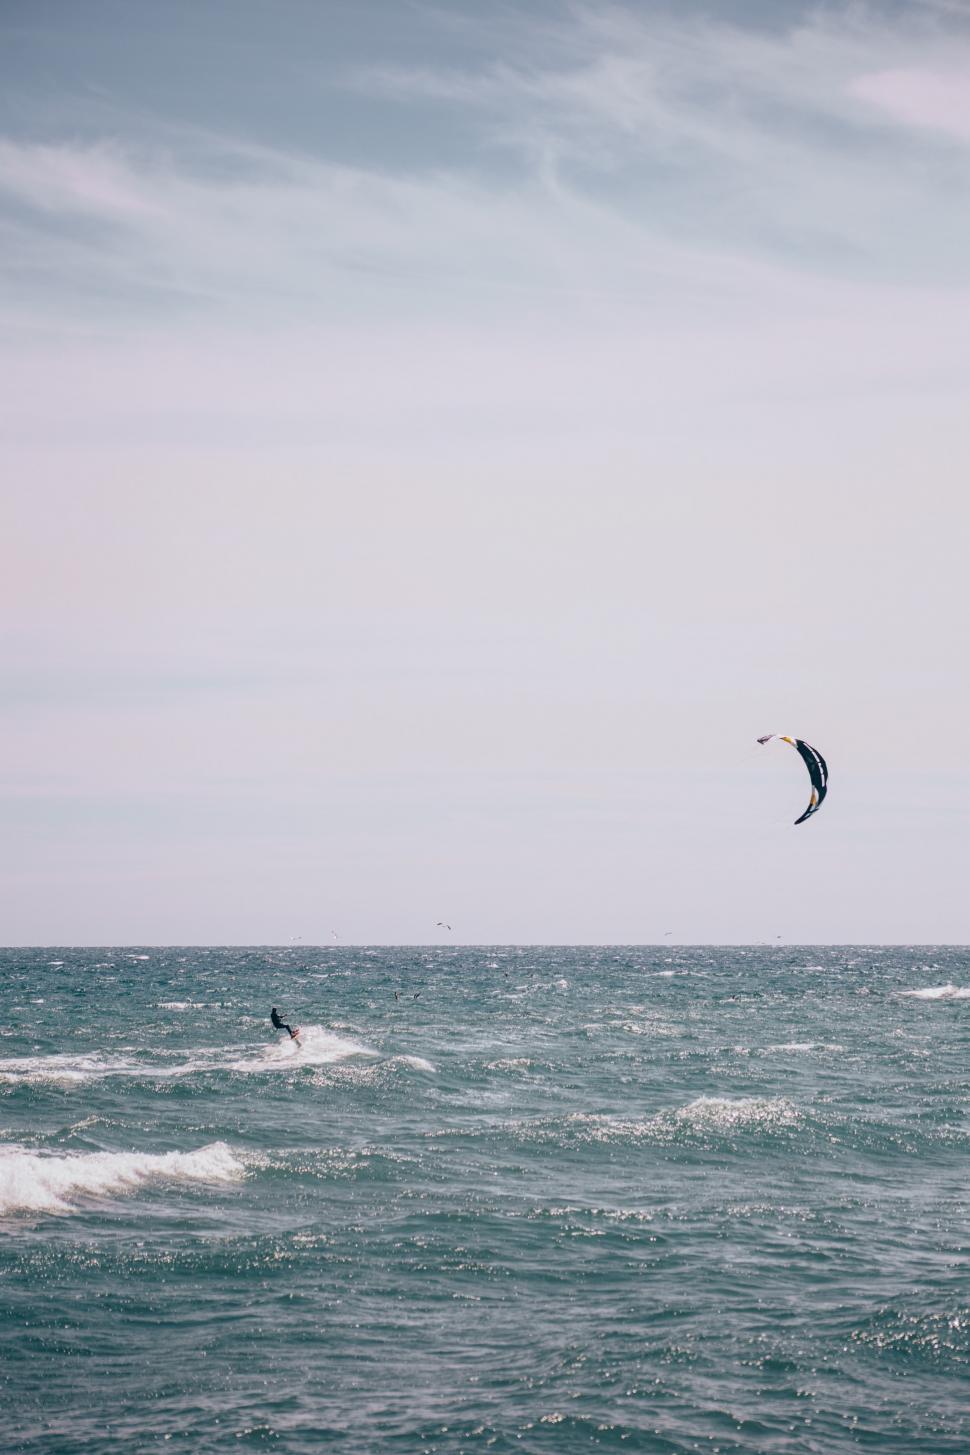 Free Image of Surfboarding with surfing kite 